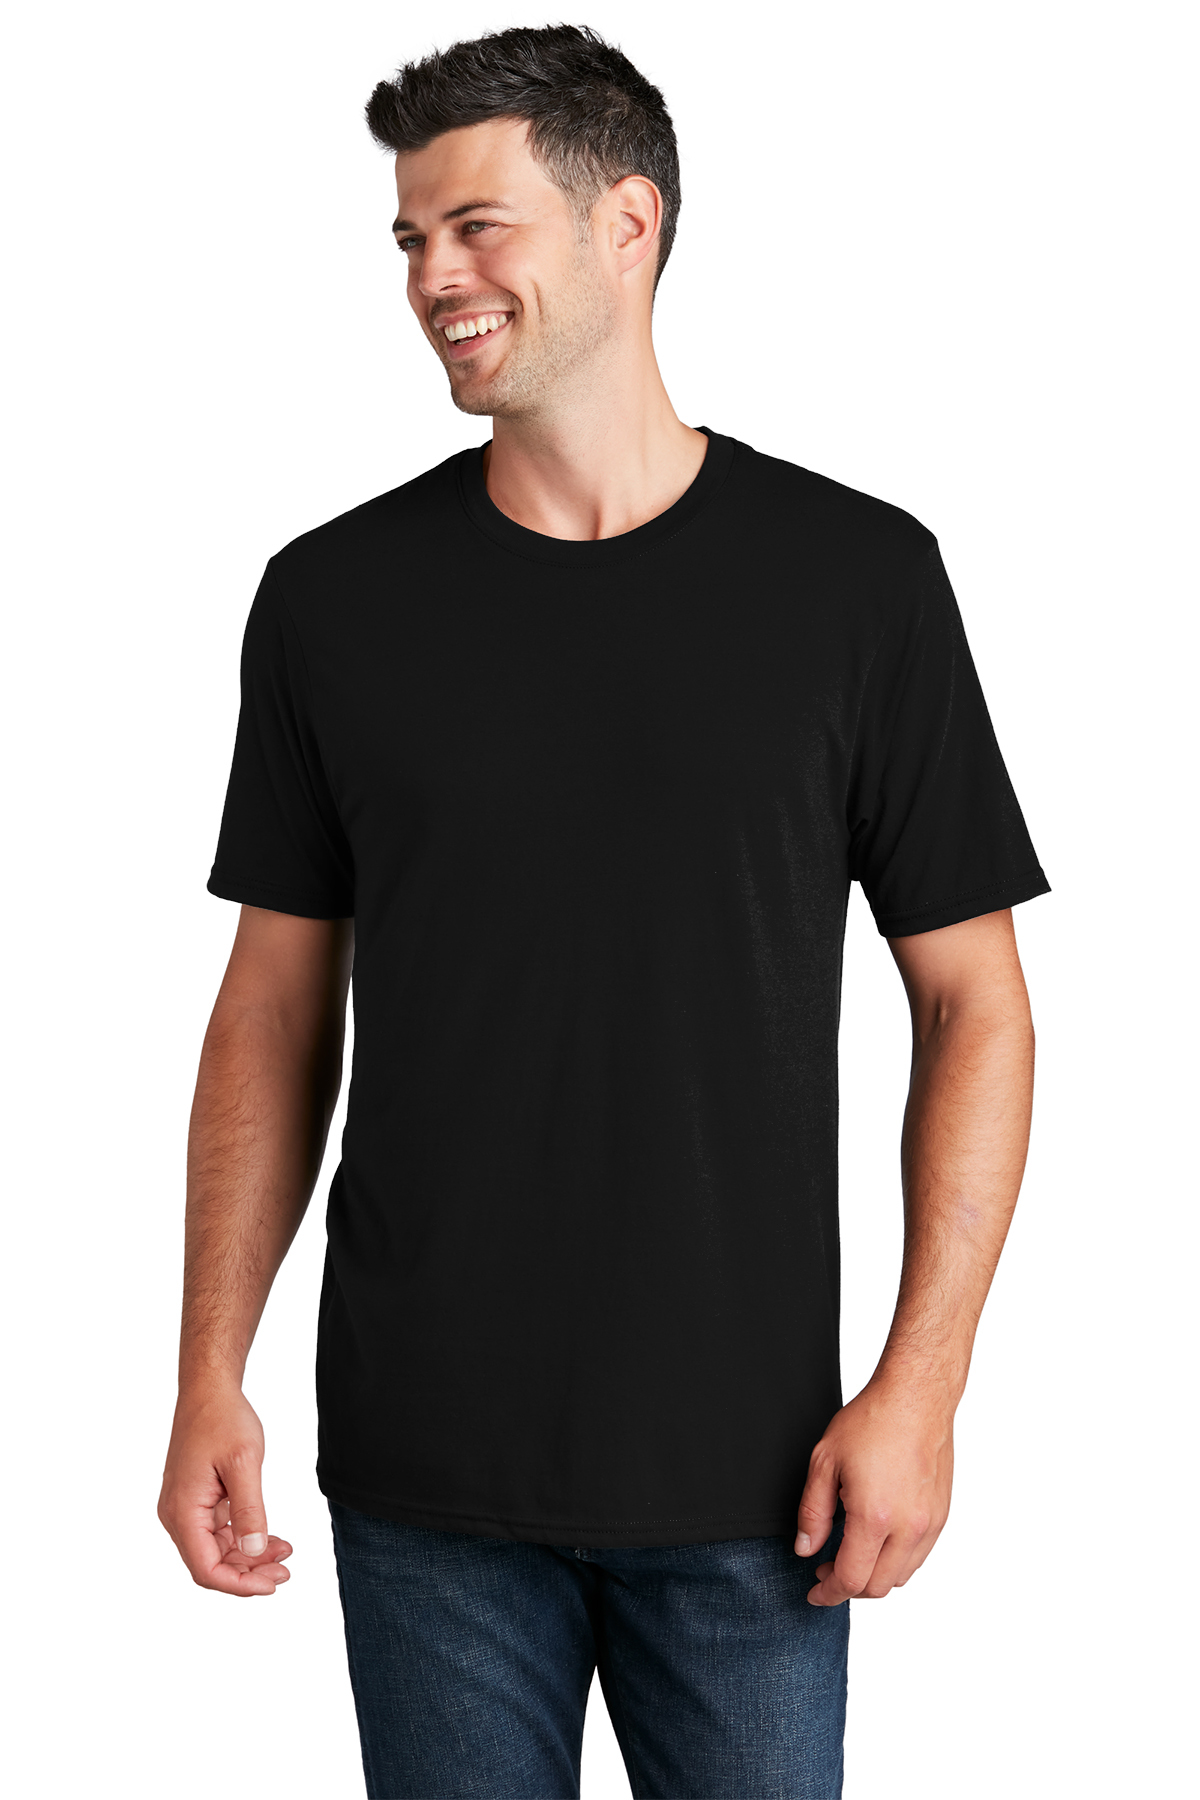 Port & Company Fan Favorite Blend Tee | Product | Company Casuals